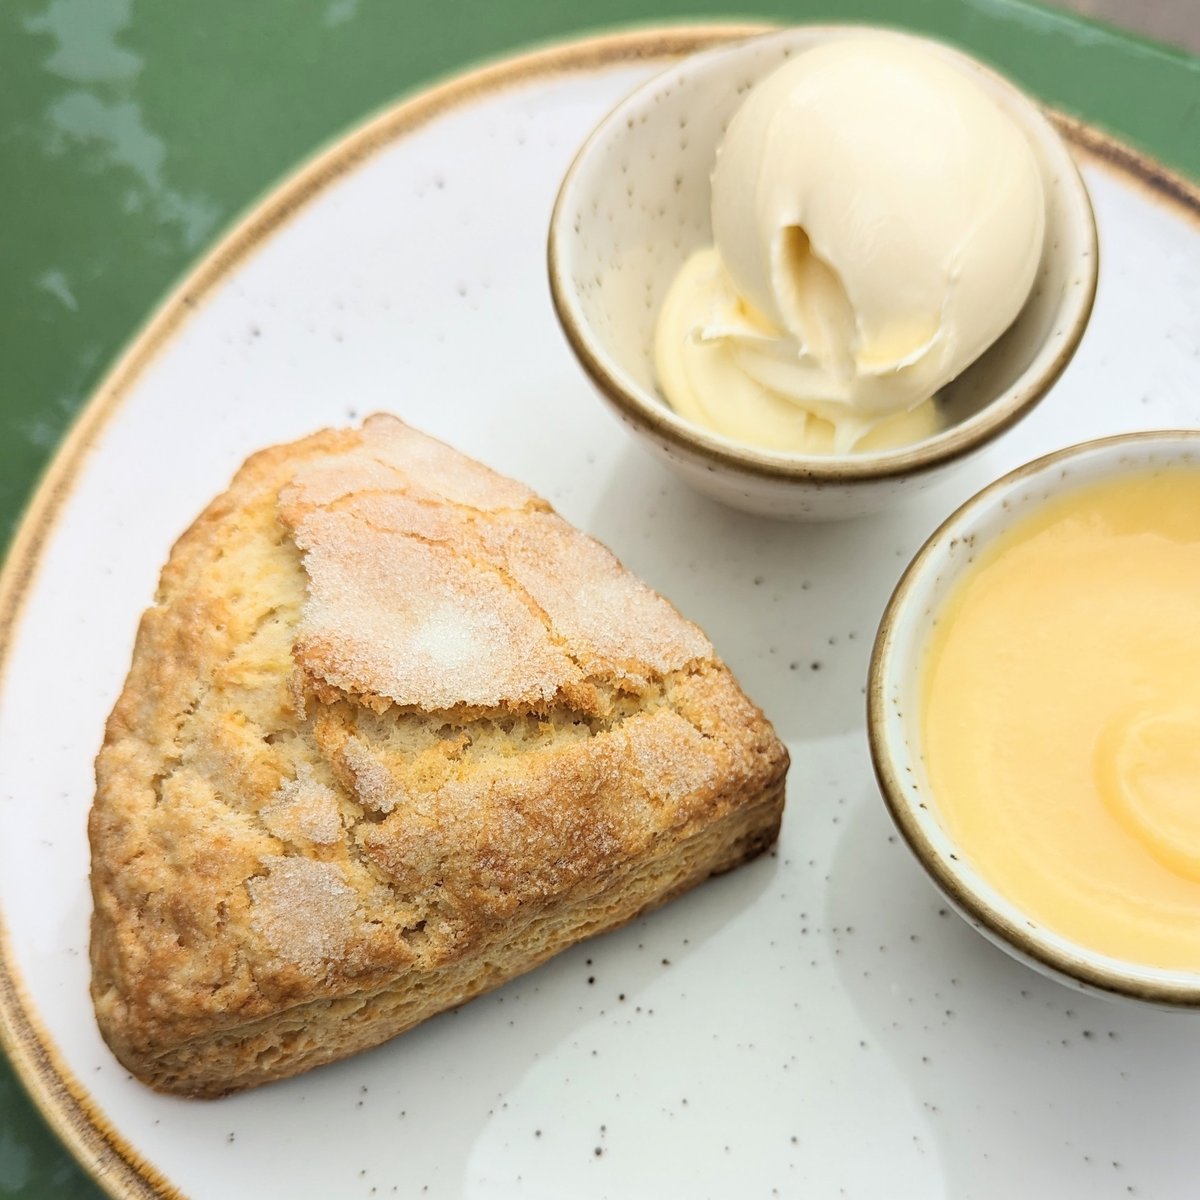 LEMON SCONE 🍋 Have you tried our lemon scone yet, they're made fresh and served with Clotton Creamery clotted cream and our nice and tangy lemon curd. Enjoy eating in or as a take away. Now the real question is, clotted cream or lemon curd first?